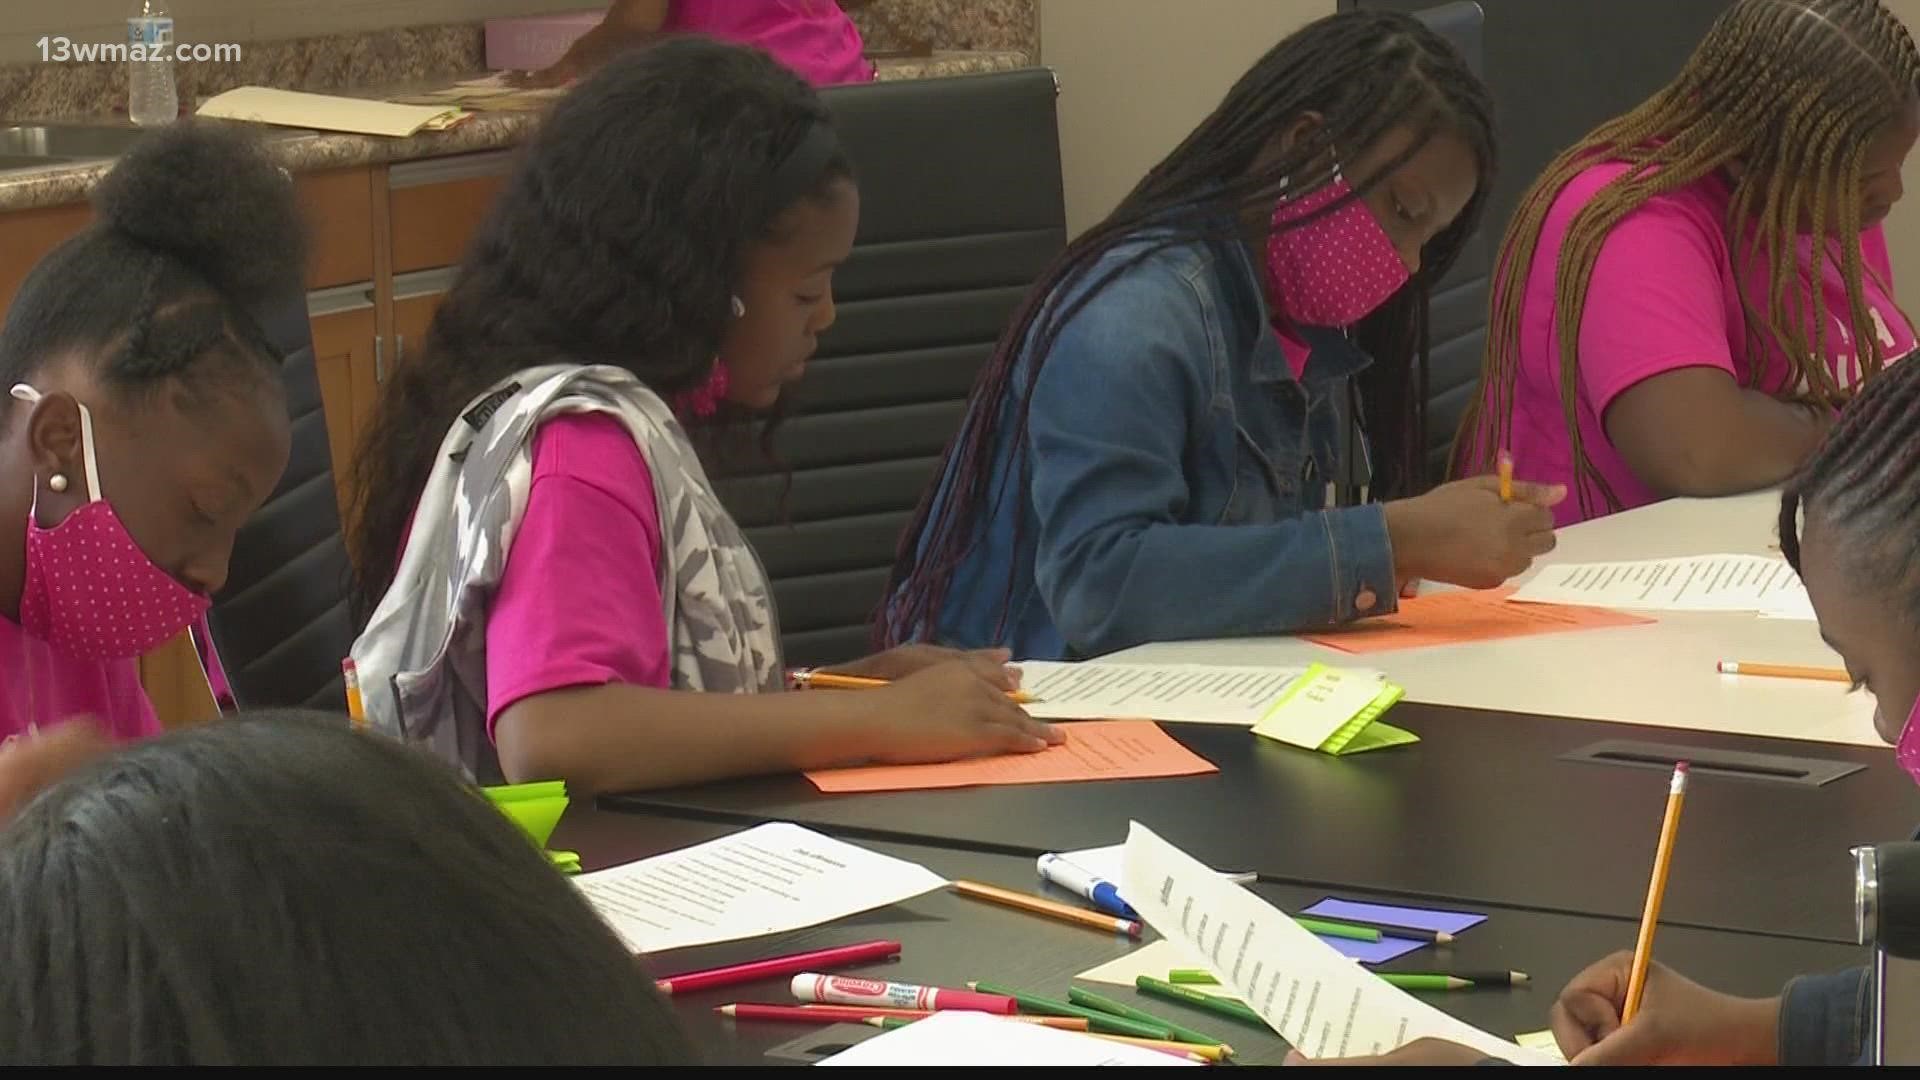 Teens to Queens summer camp was created 4 years ago, and is now in Macon for another year.